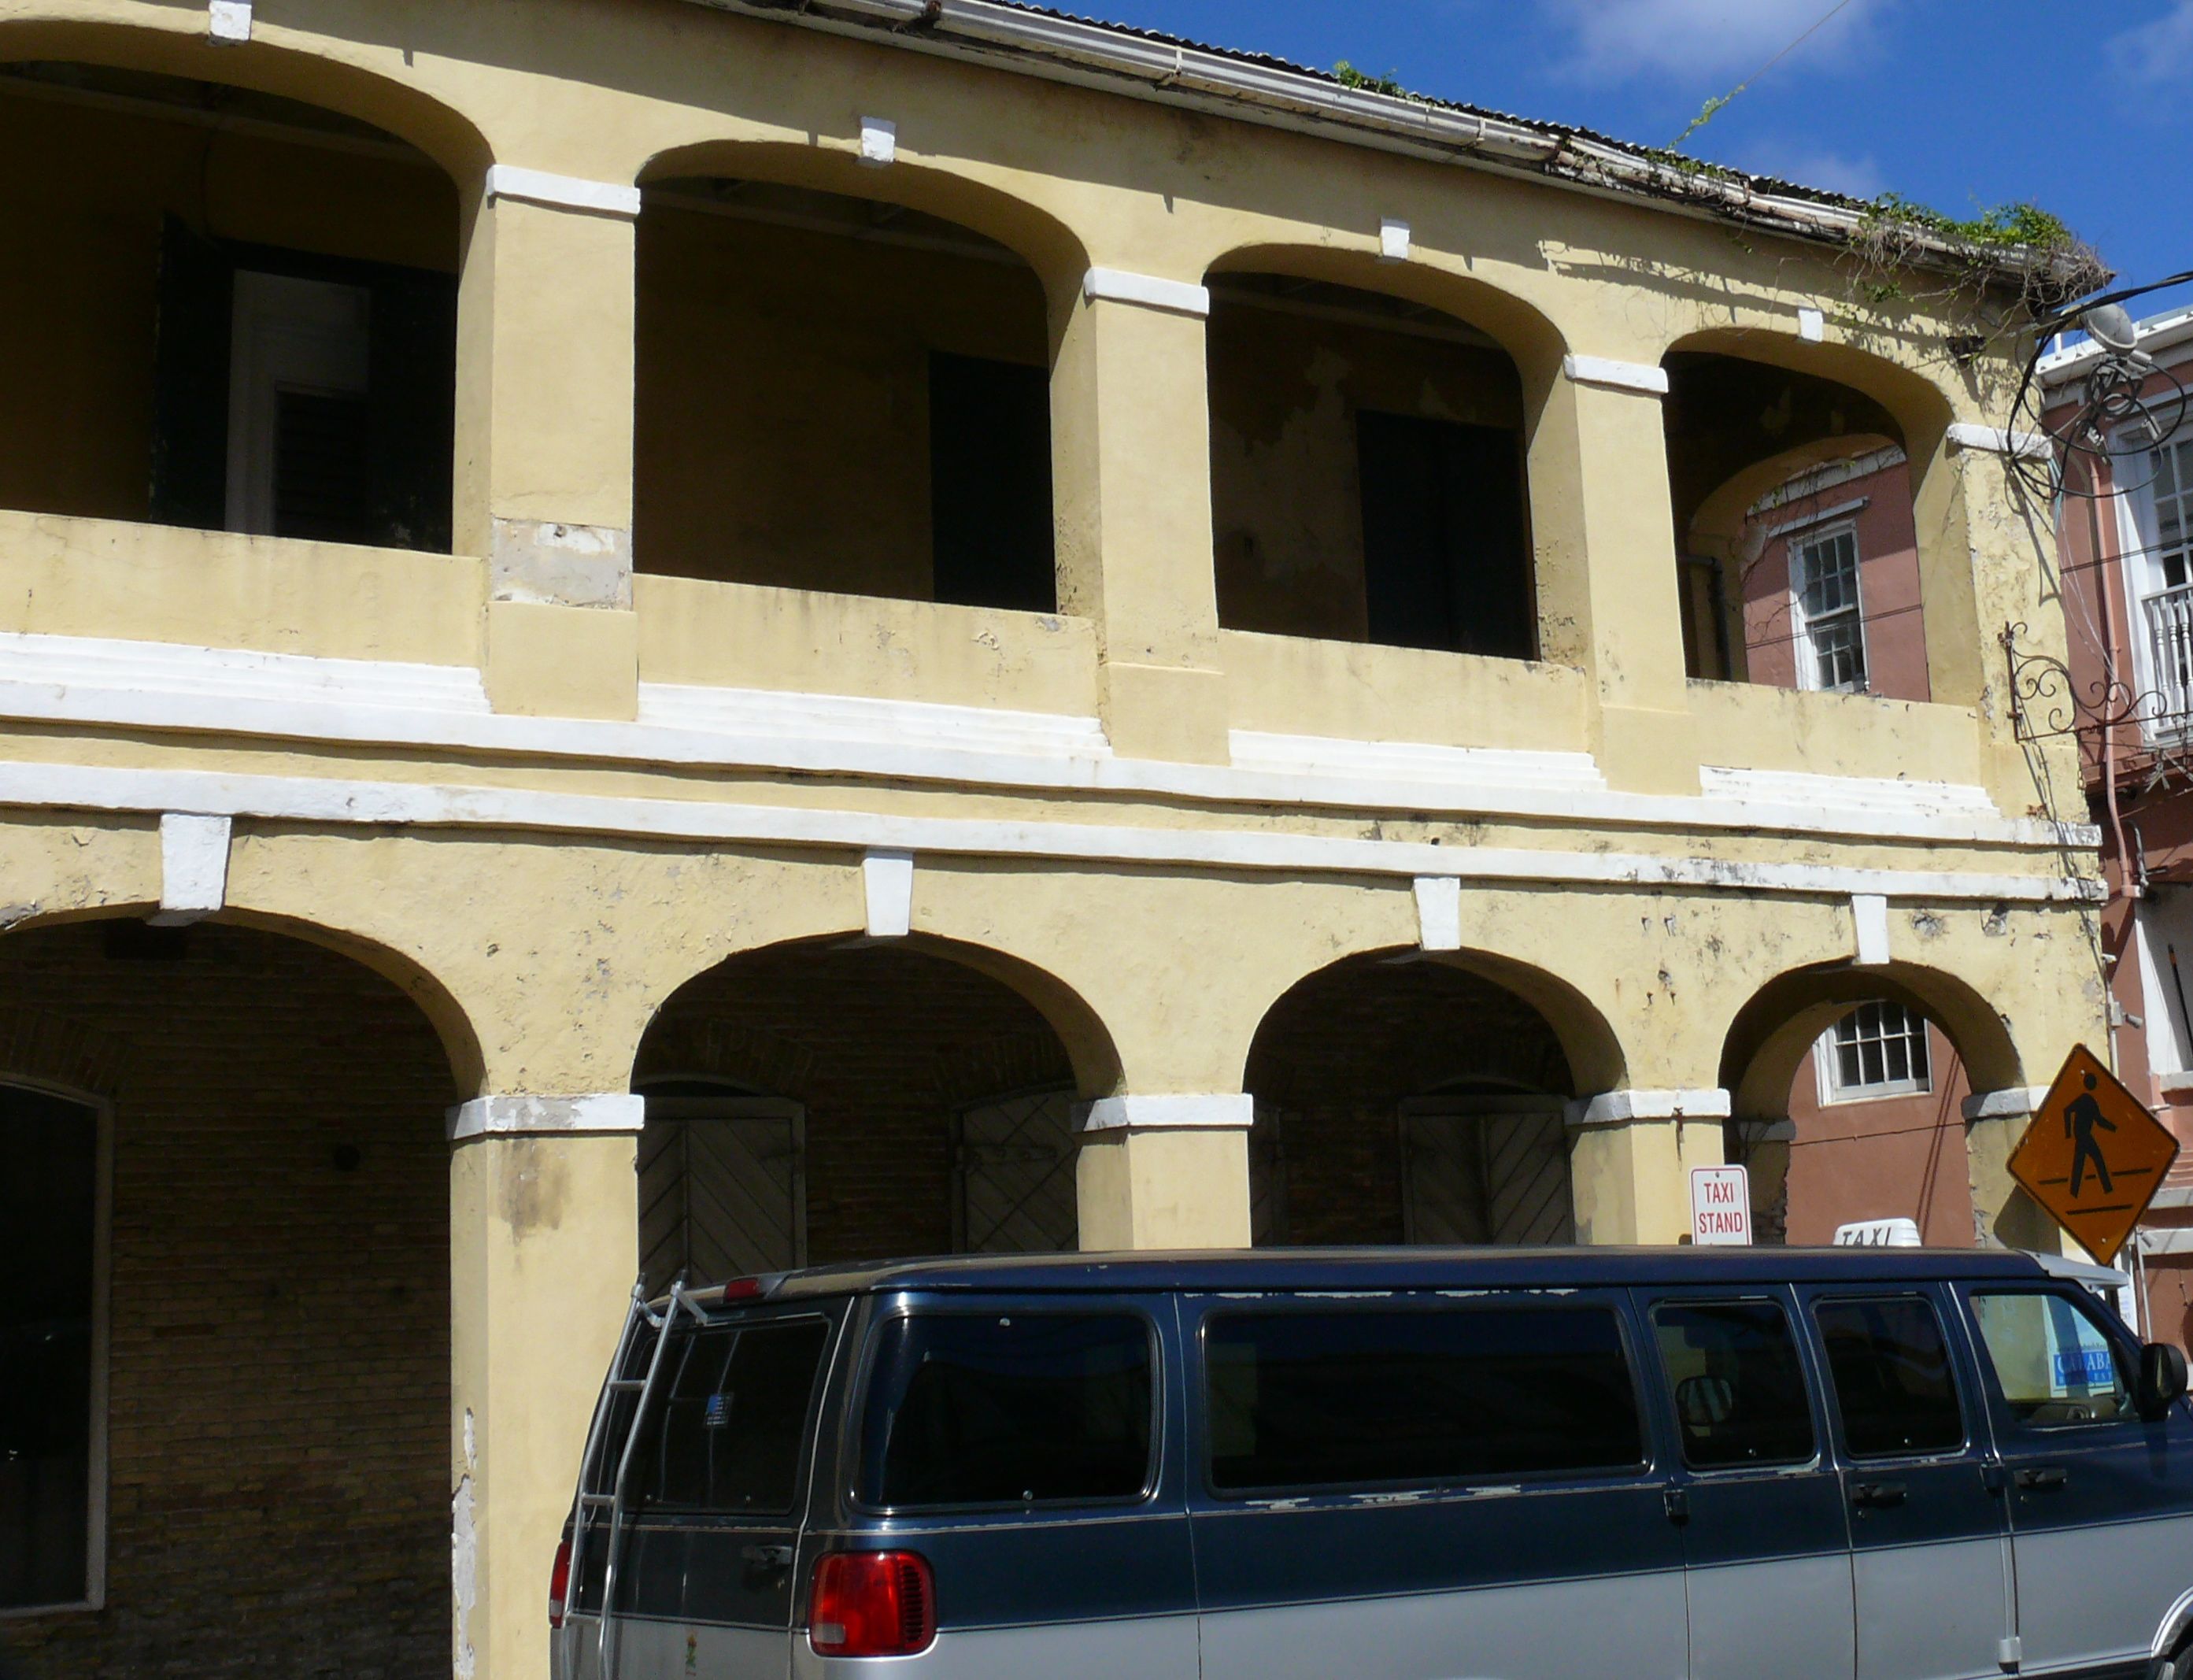 The derelict property on King Street in Christiansted. (Photo Bill Kossler)